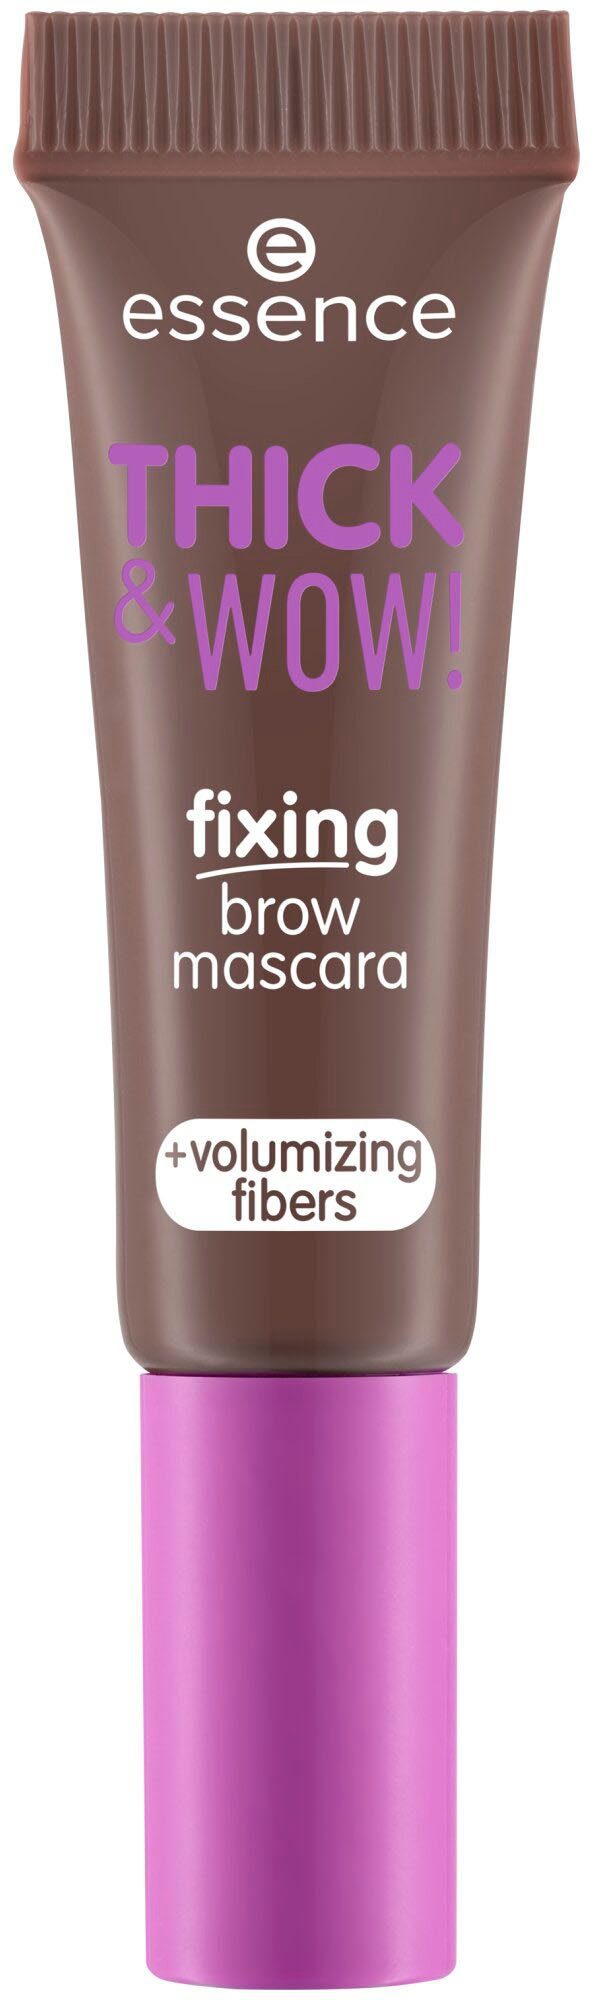 Essence Augenbrauen-Gel THICK & WOW! mascara, fixing 3-tlg. Ash Brown brow